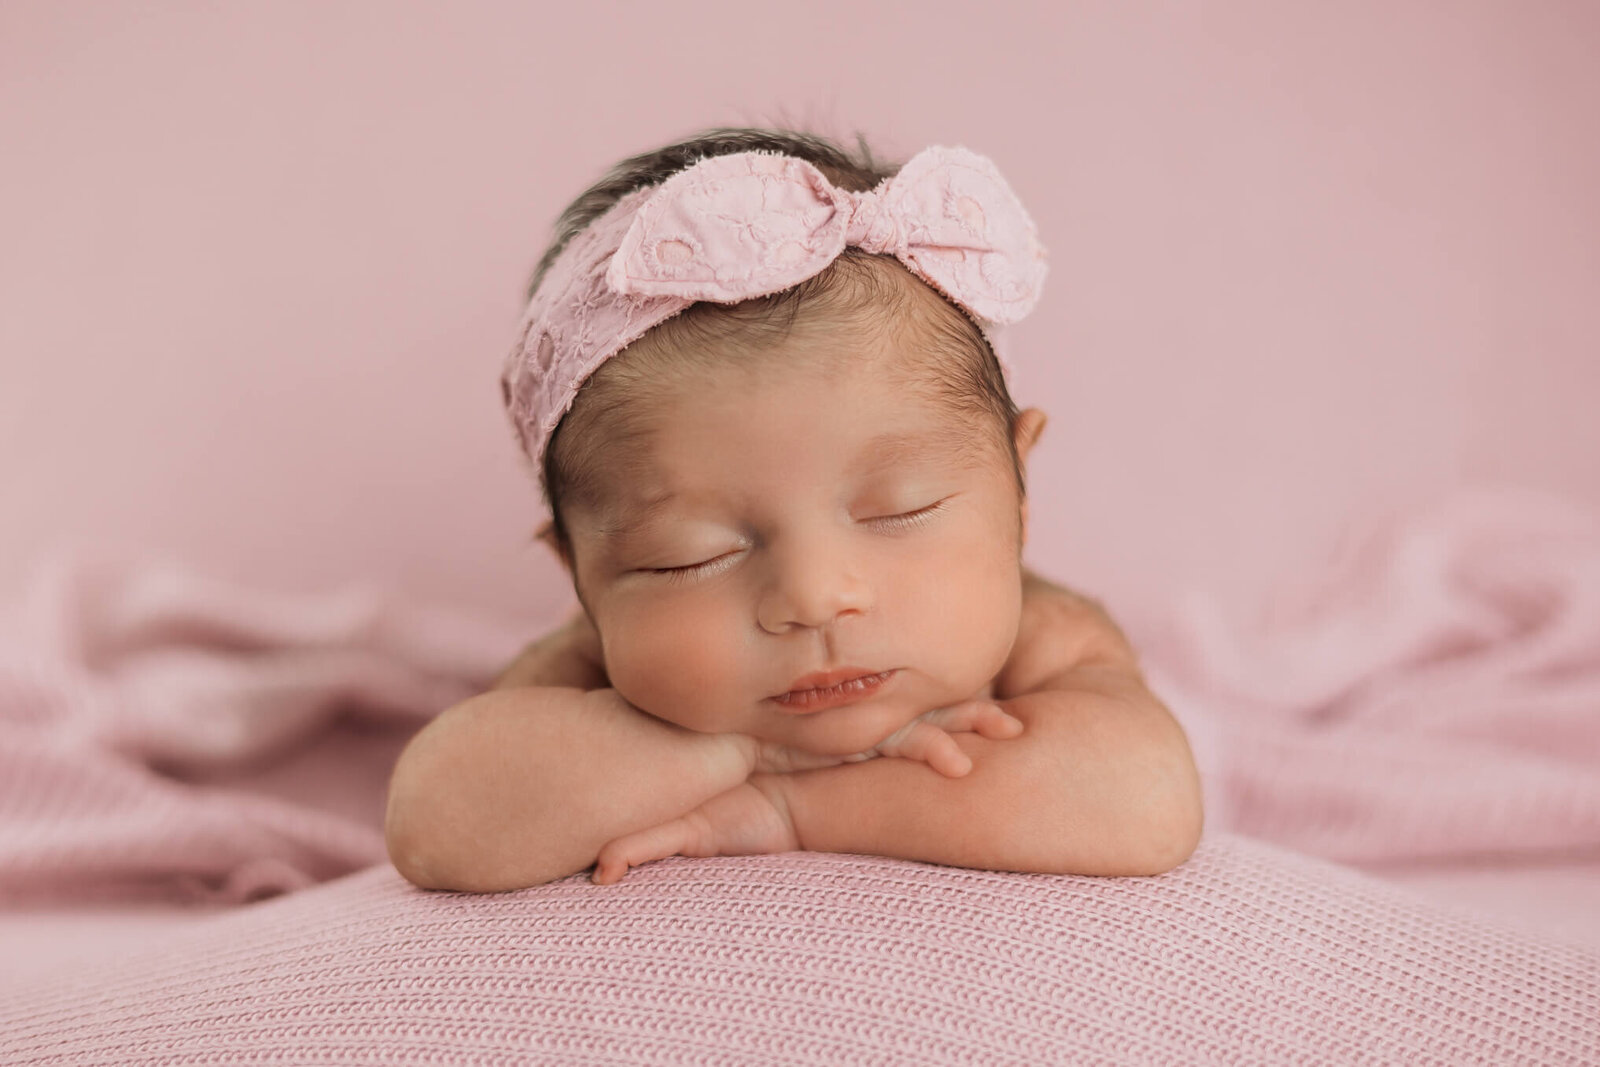 Baby girl with her head resting on her hands posed in studio with a pink headband on during her newborn session